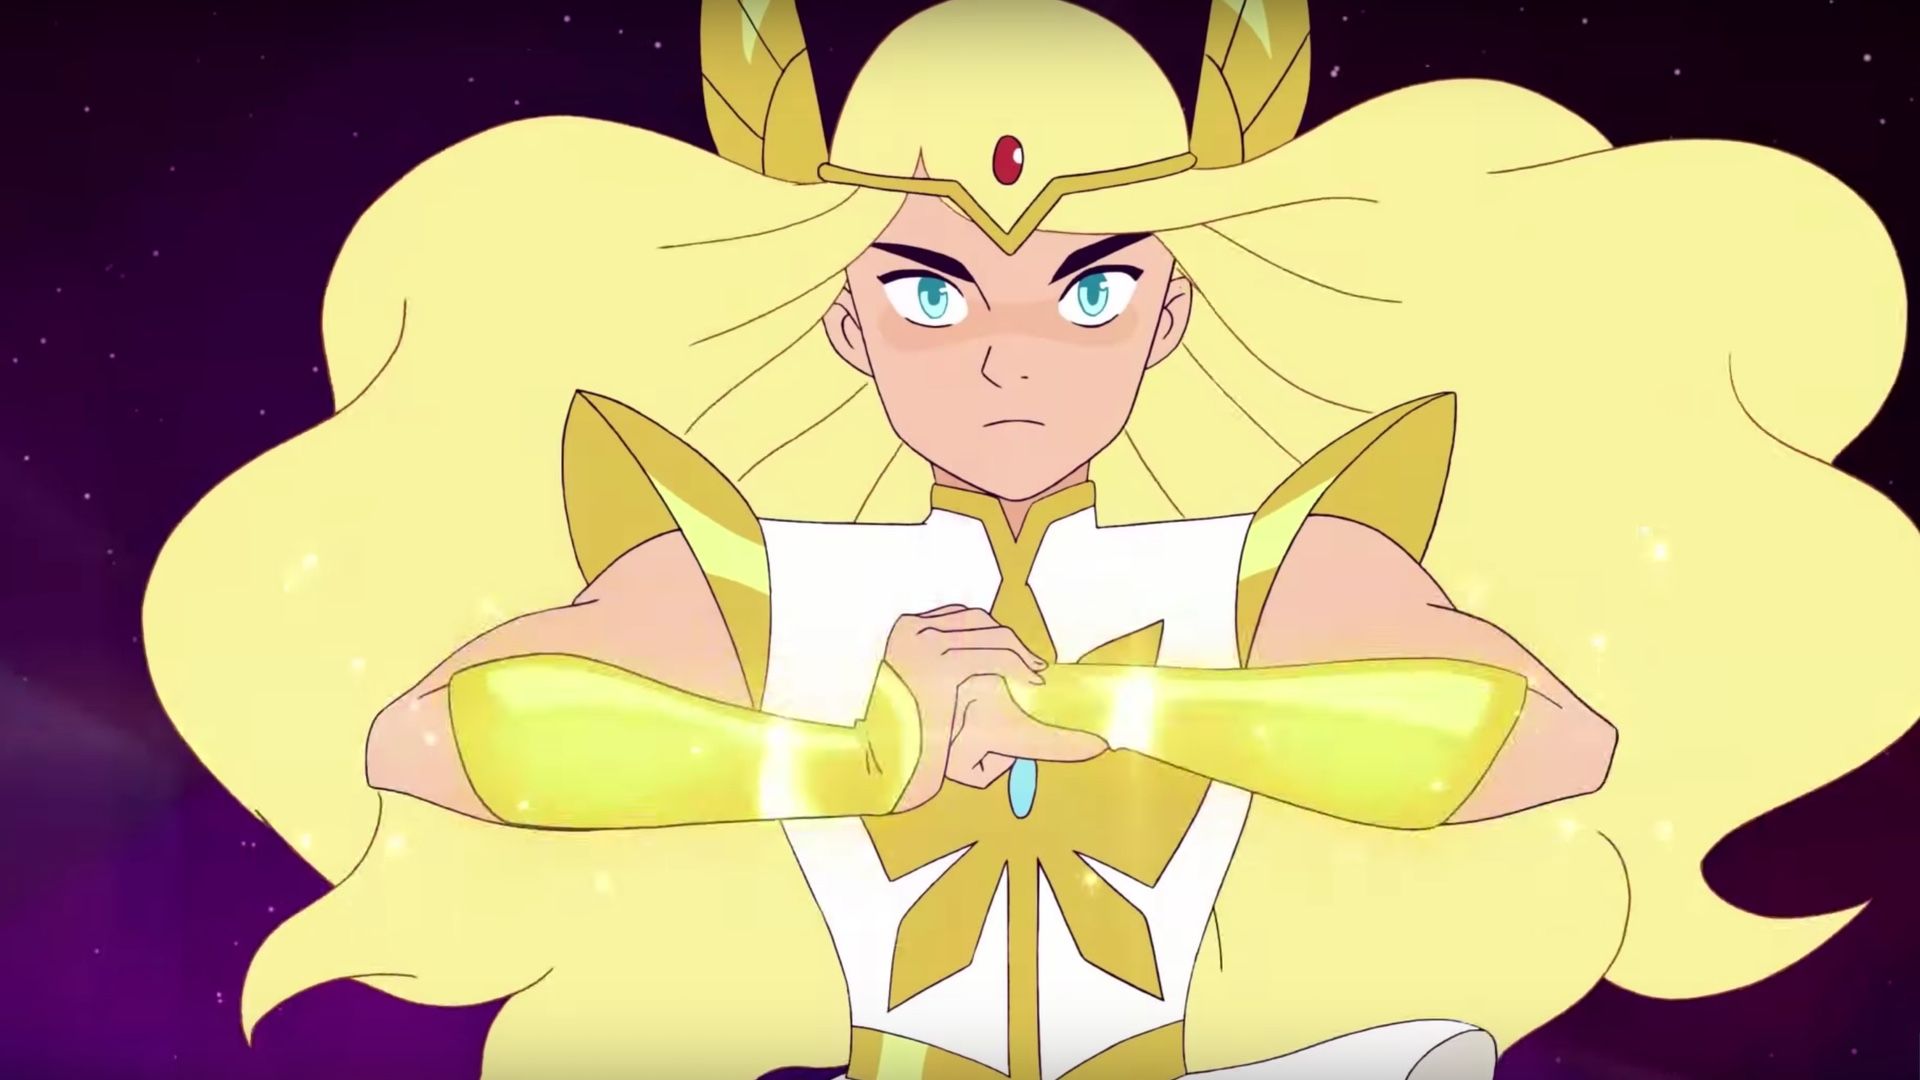 9. She-Ra and the Princesses of Power - wide 4